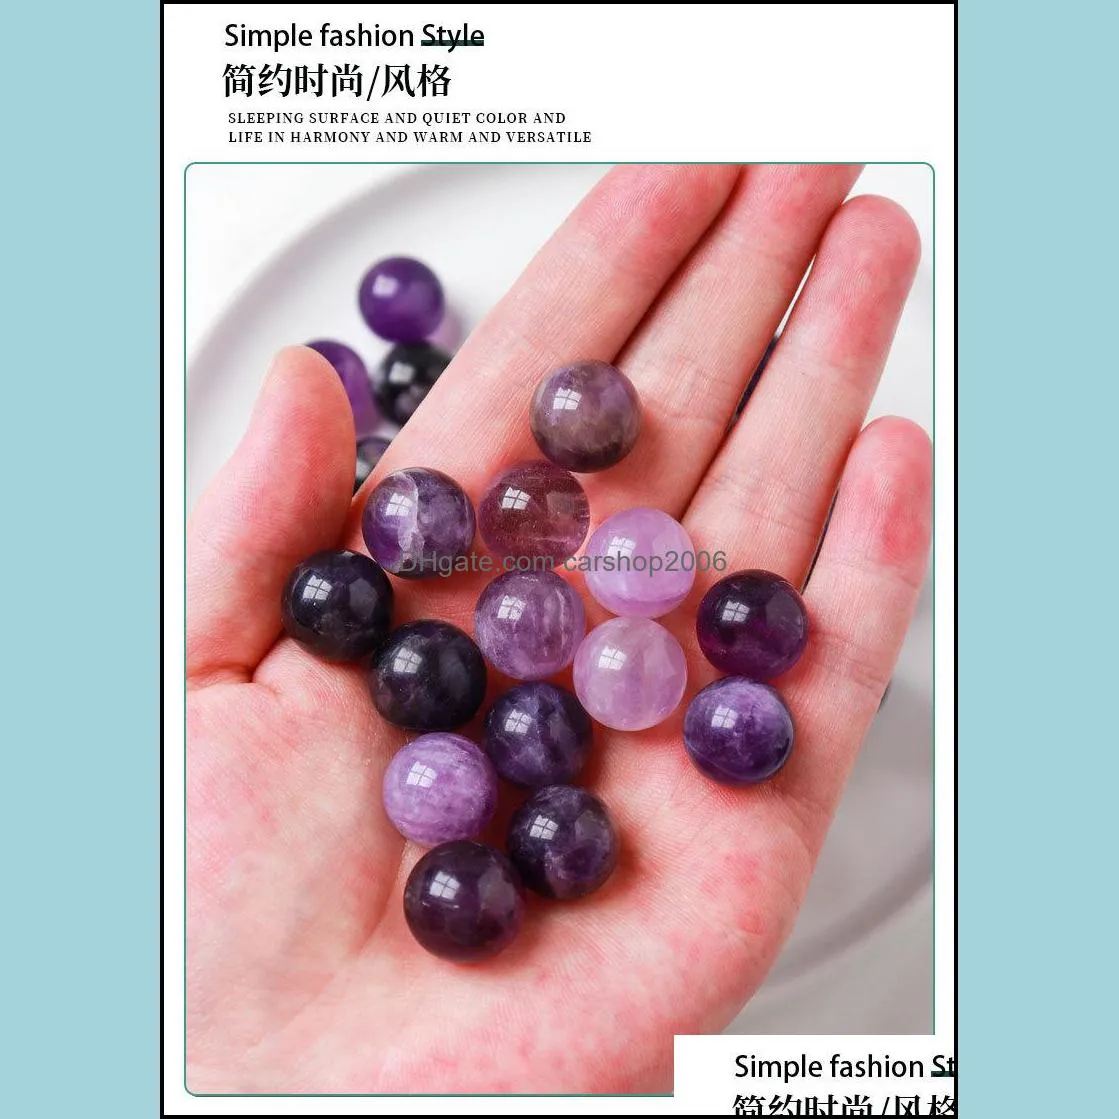 natural stone 15mm amethyst ball bead palm quartz mineral crystal tumbled gemstones hand piece home decoration accessories gift